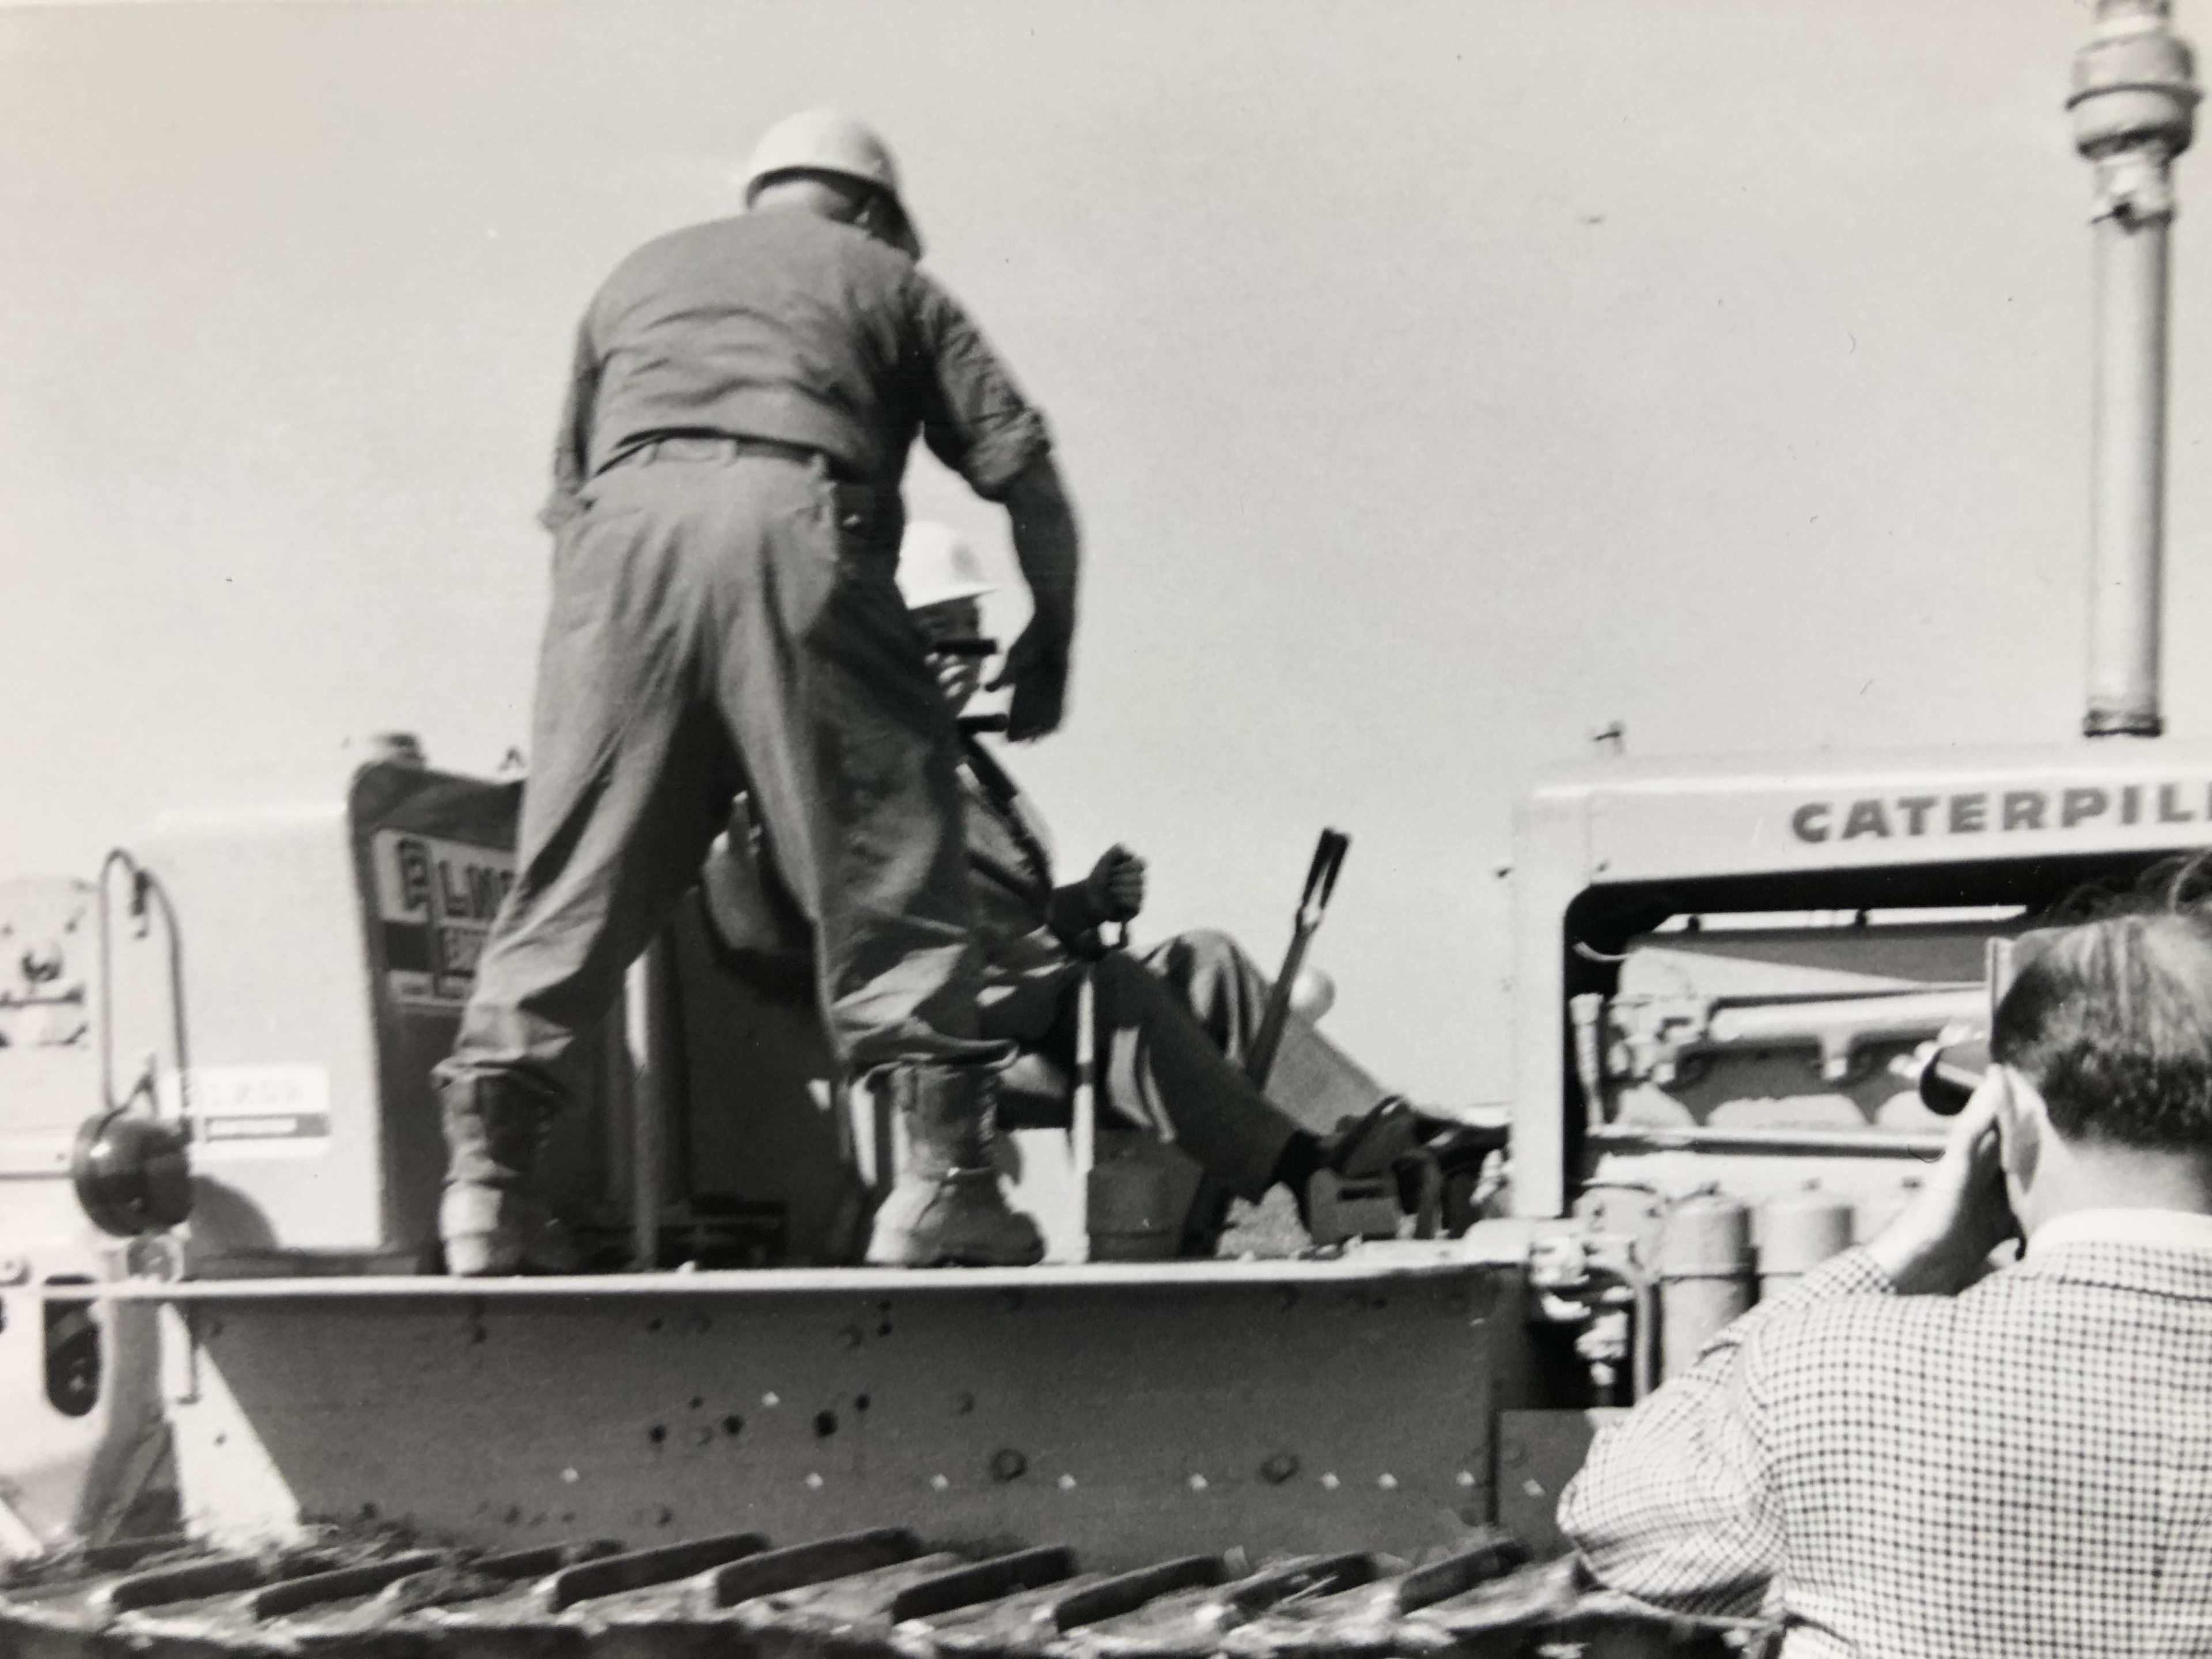 Two men sit on a tractor as one prepares to move it forward.